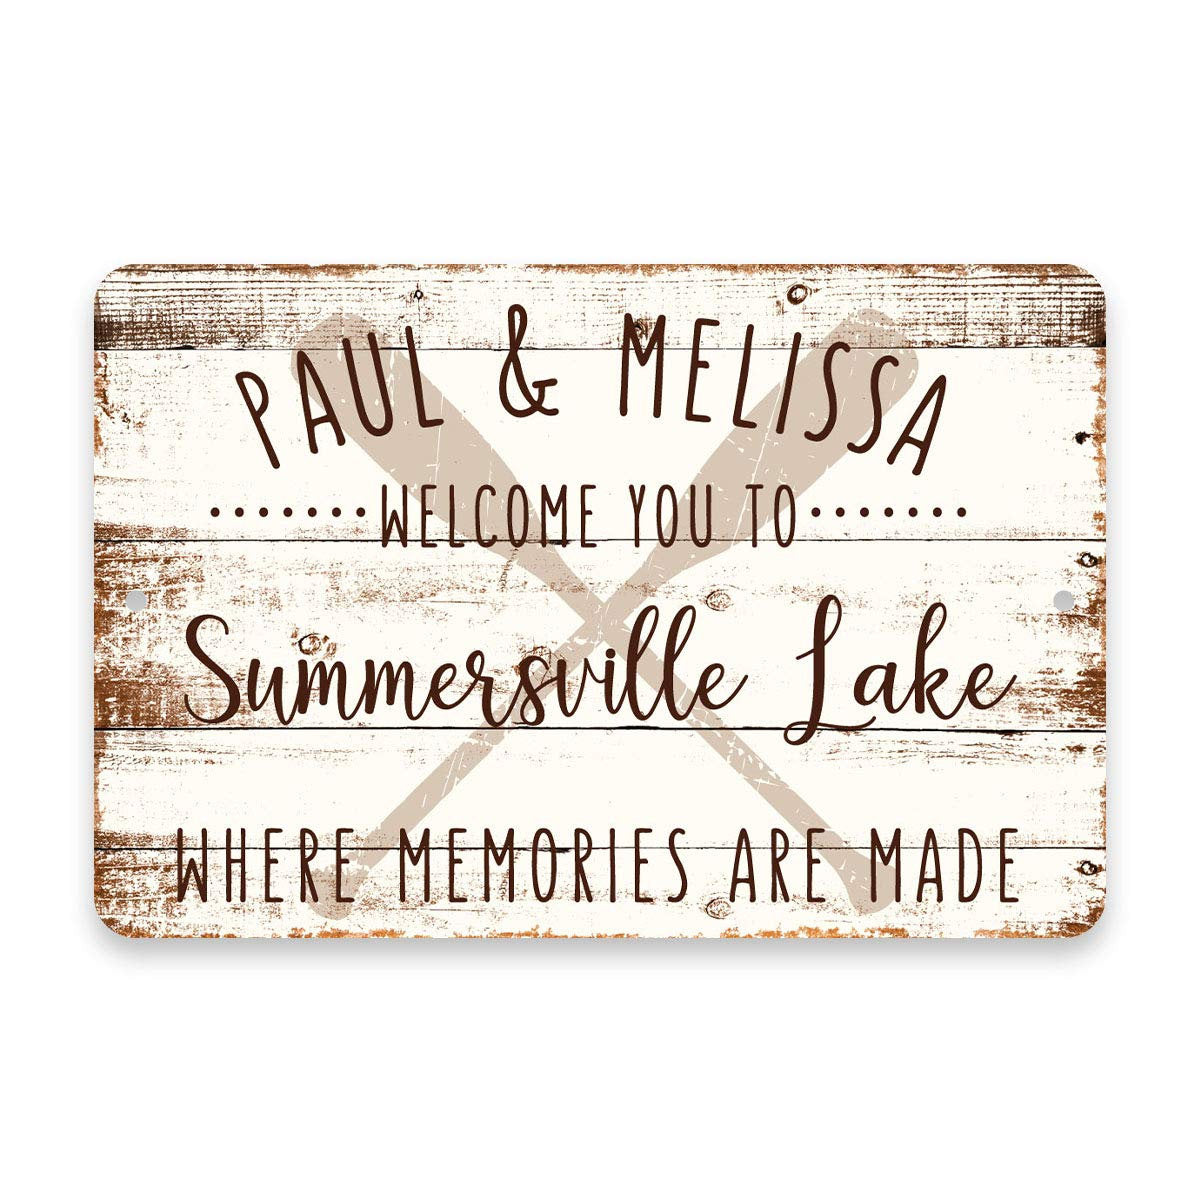 Personalized Welcome to Summersville Lake Where Memories are Made Sign - 8 X 12 Metal Sign with Wood Look